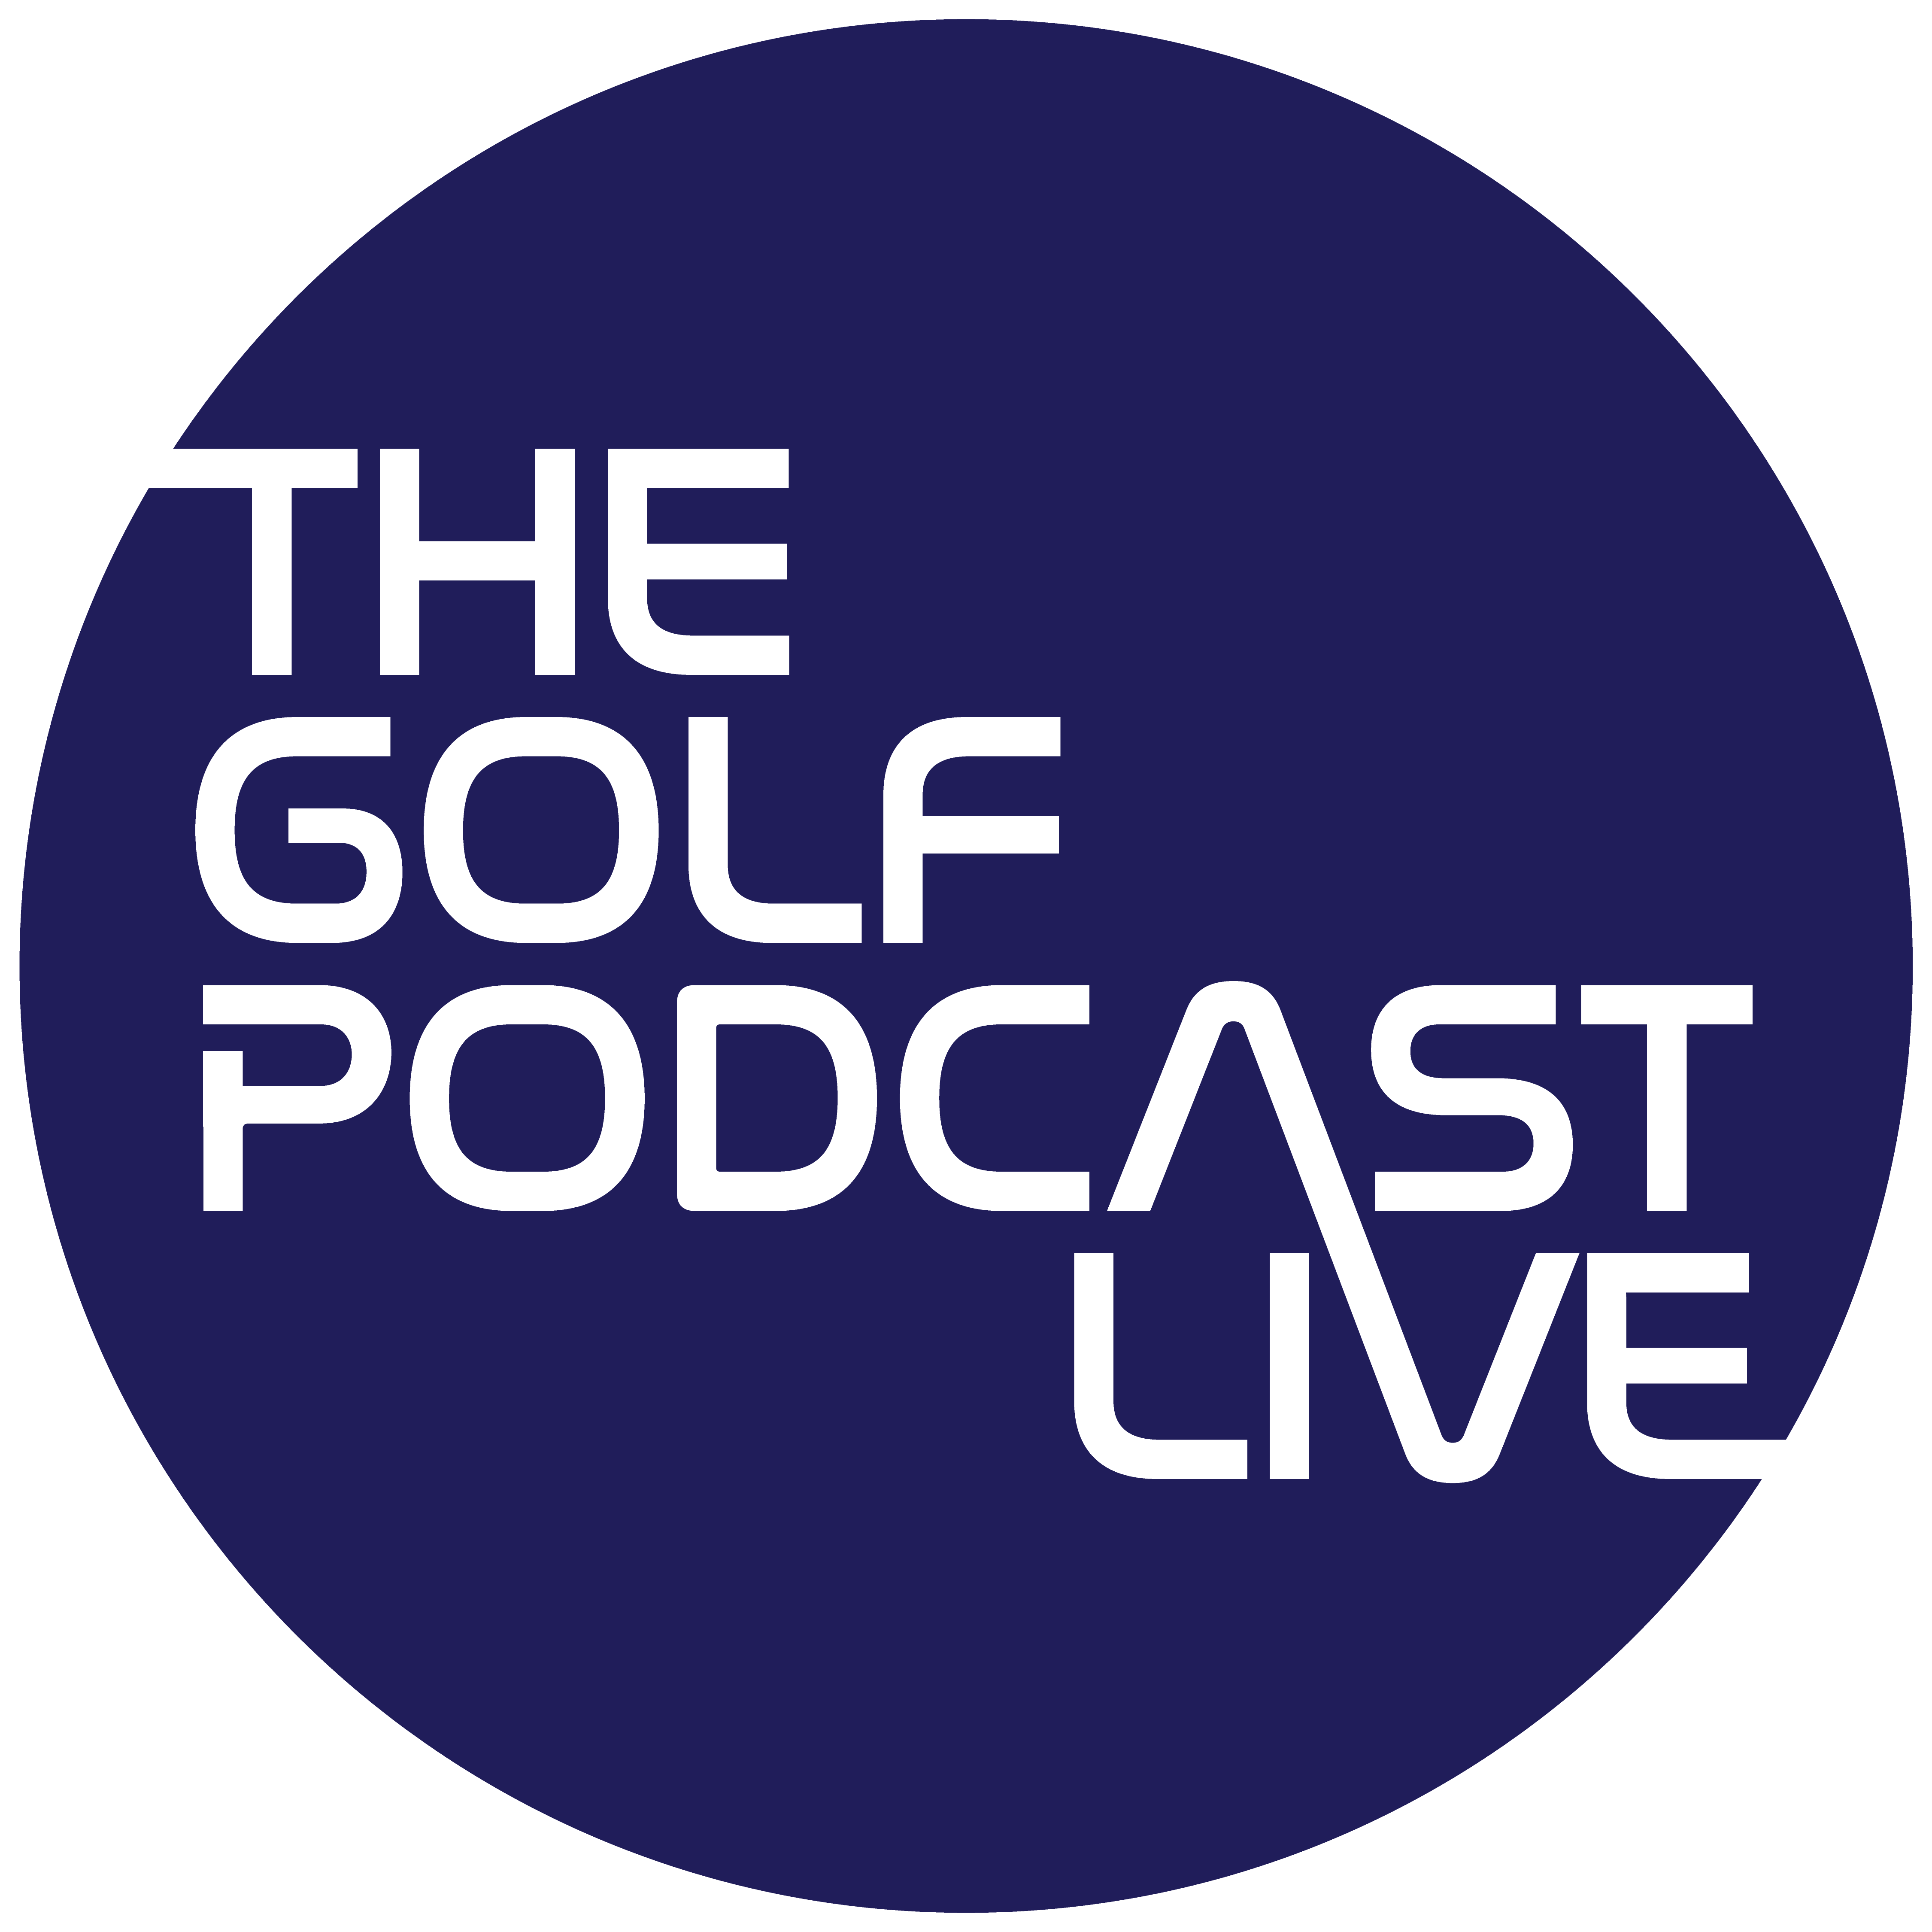 The Golf Podcast Live